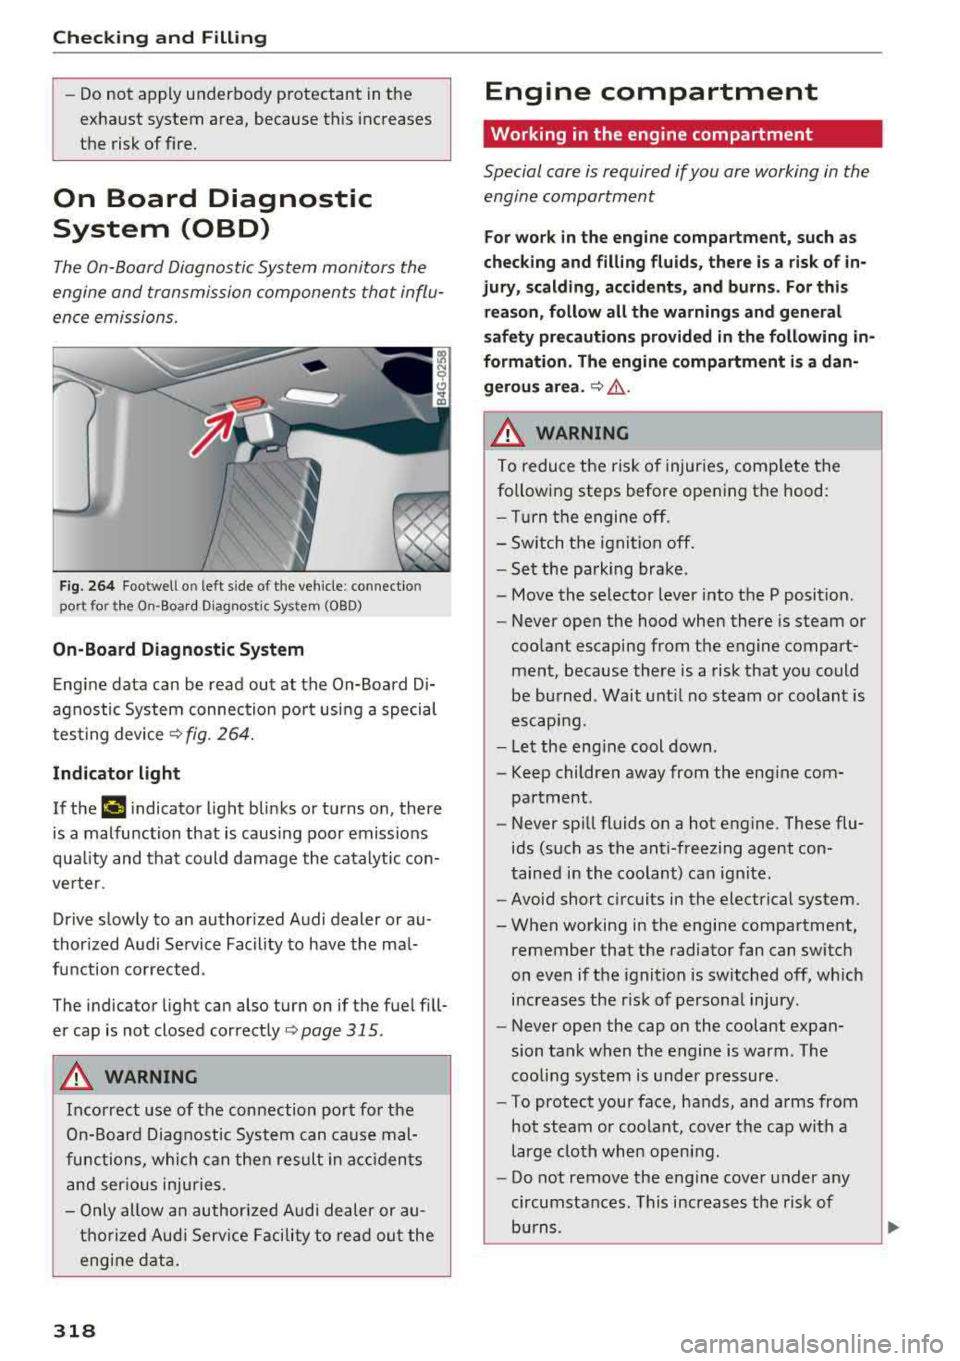 AUDI A3 SEDAN 2018  Owners Manual Checking  and  Filling 
-Do  not  a pply u nder body  protectant  in t he 
exhaust  system  area,  because  this  increases 
the  risk of fire. 
On  Board  Diagnostic  
System  (OBD) 
The On-Board Dia